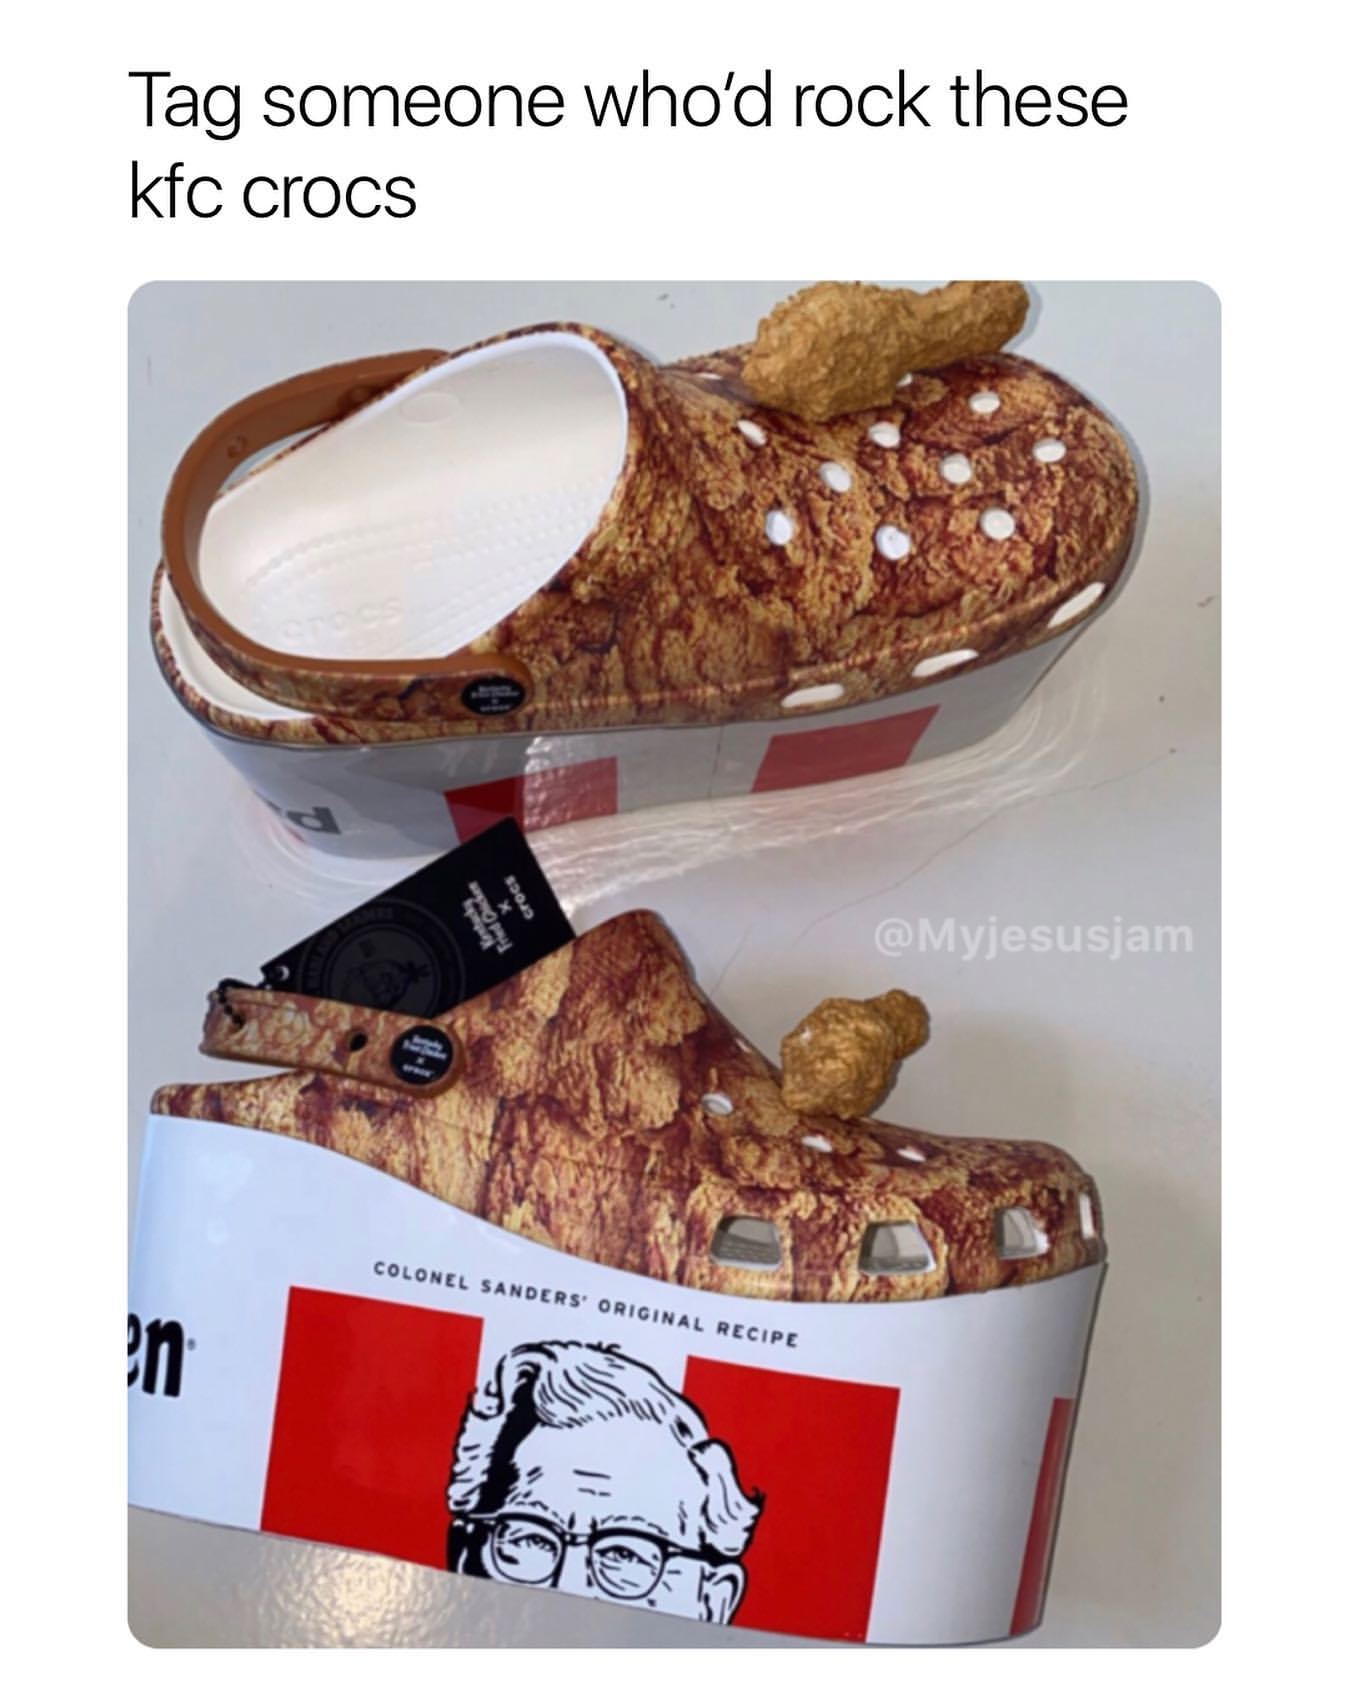 Tag someone who'd rock these kfc crocs.